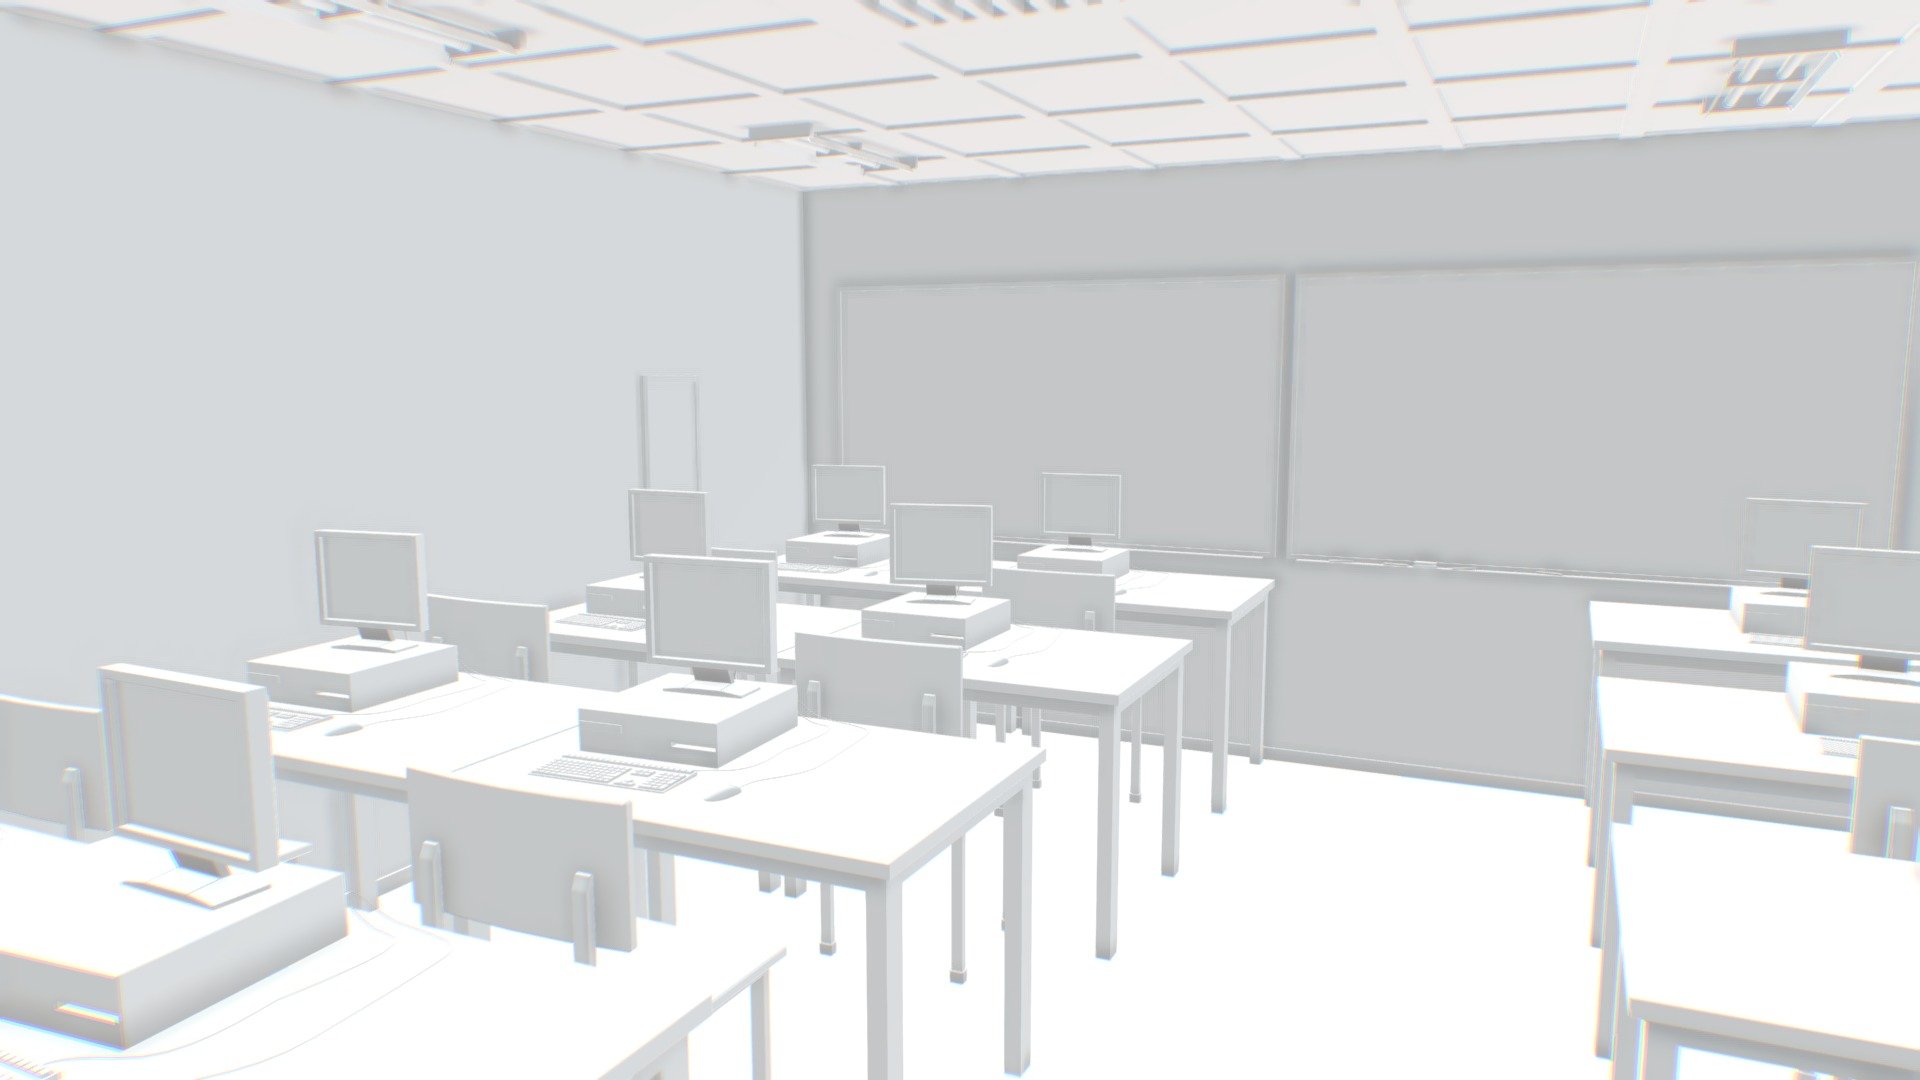 class room interior classroom office chair desk pc keyboard furniture architecture school design computer equipment education student office supply academy auditorium computer - class room interior classroom office chair desk - Buy Royalty Free 3D model by kopofx 3d model